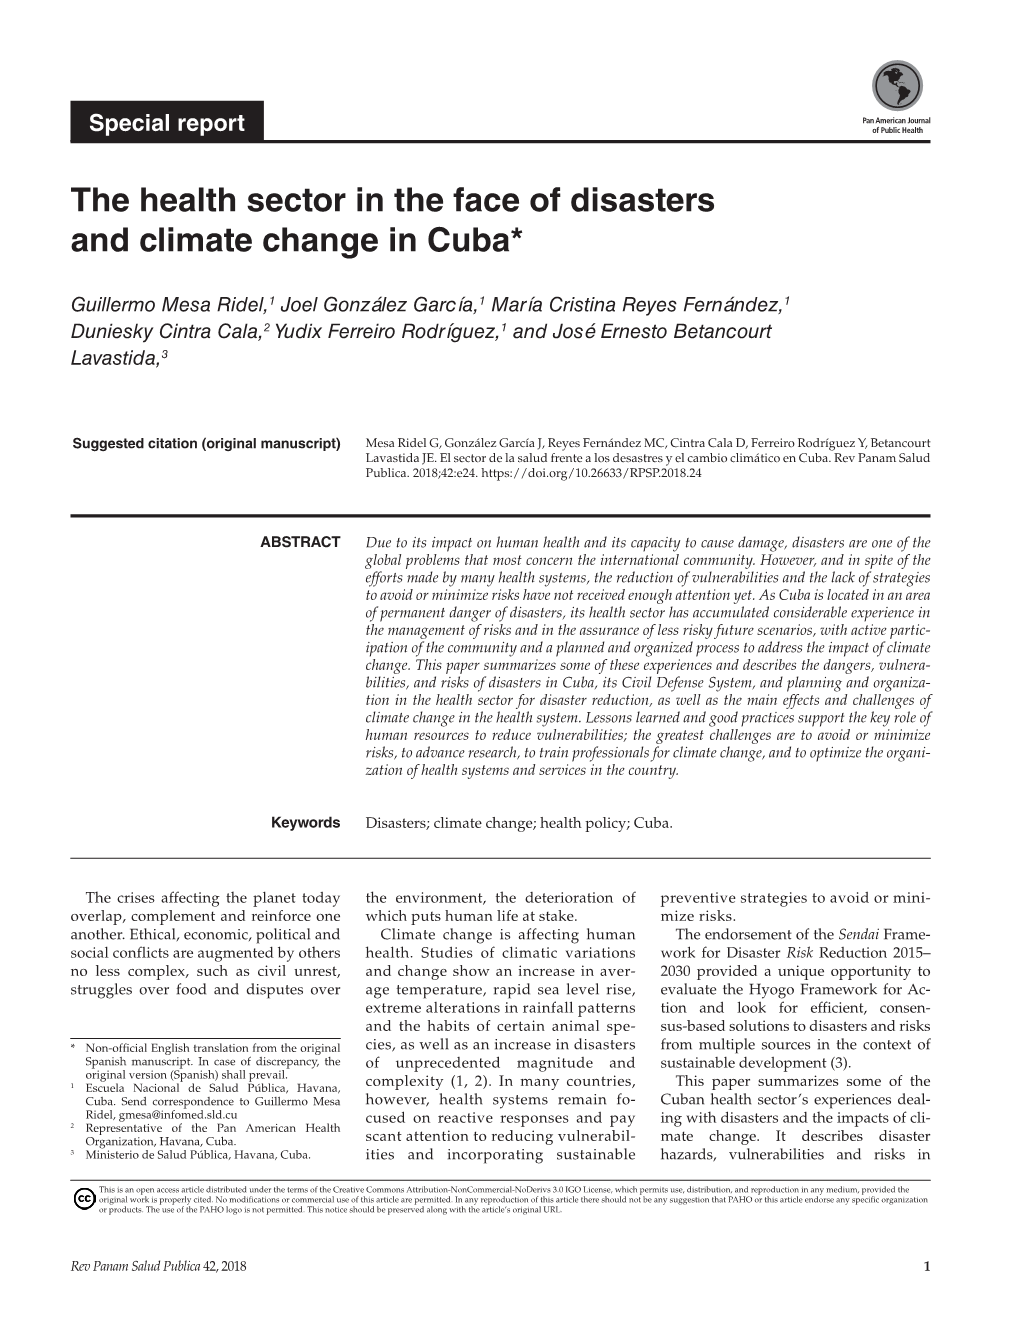 The Health Sector in the Face of Disasters and Climate Change in Cuba*